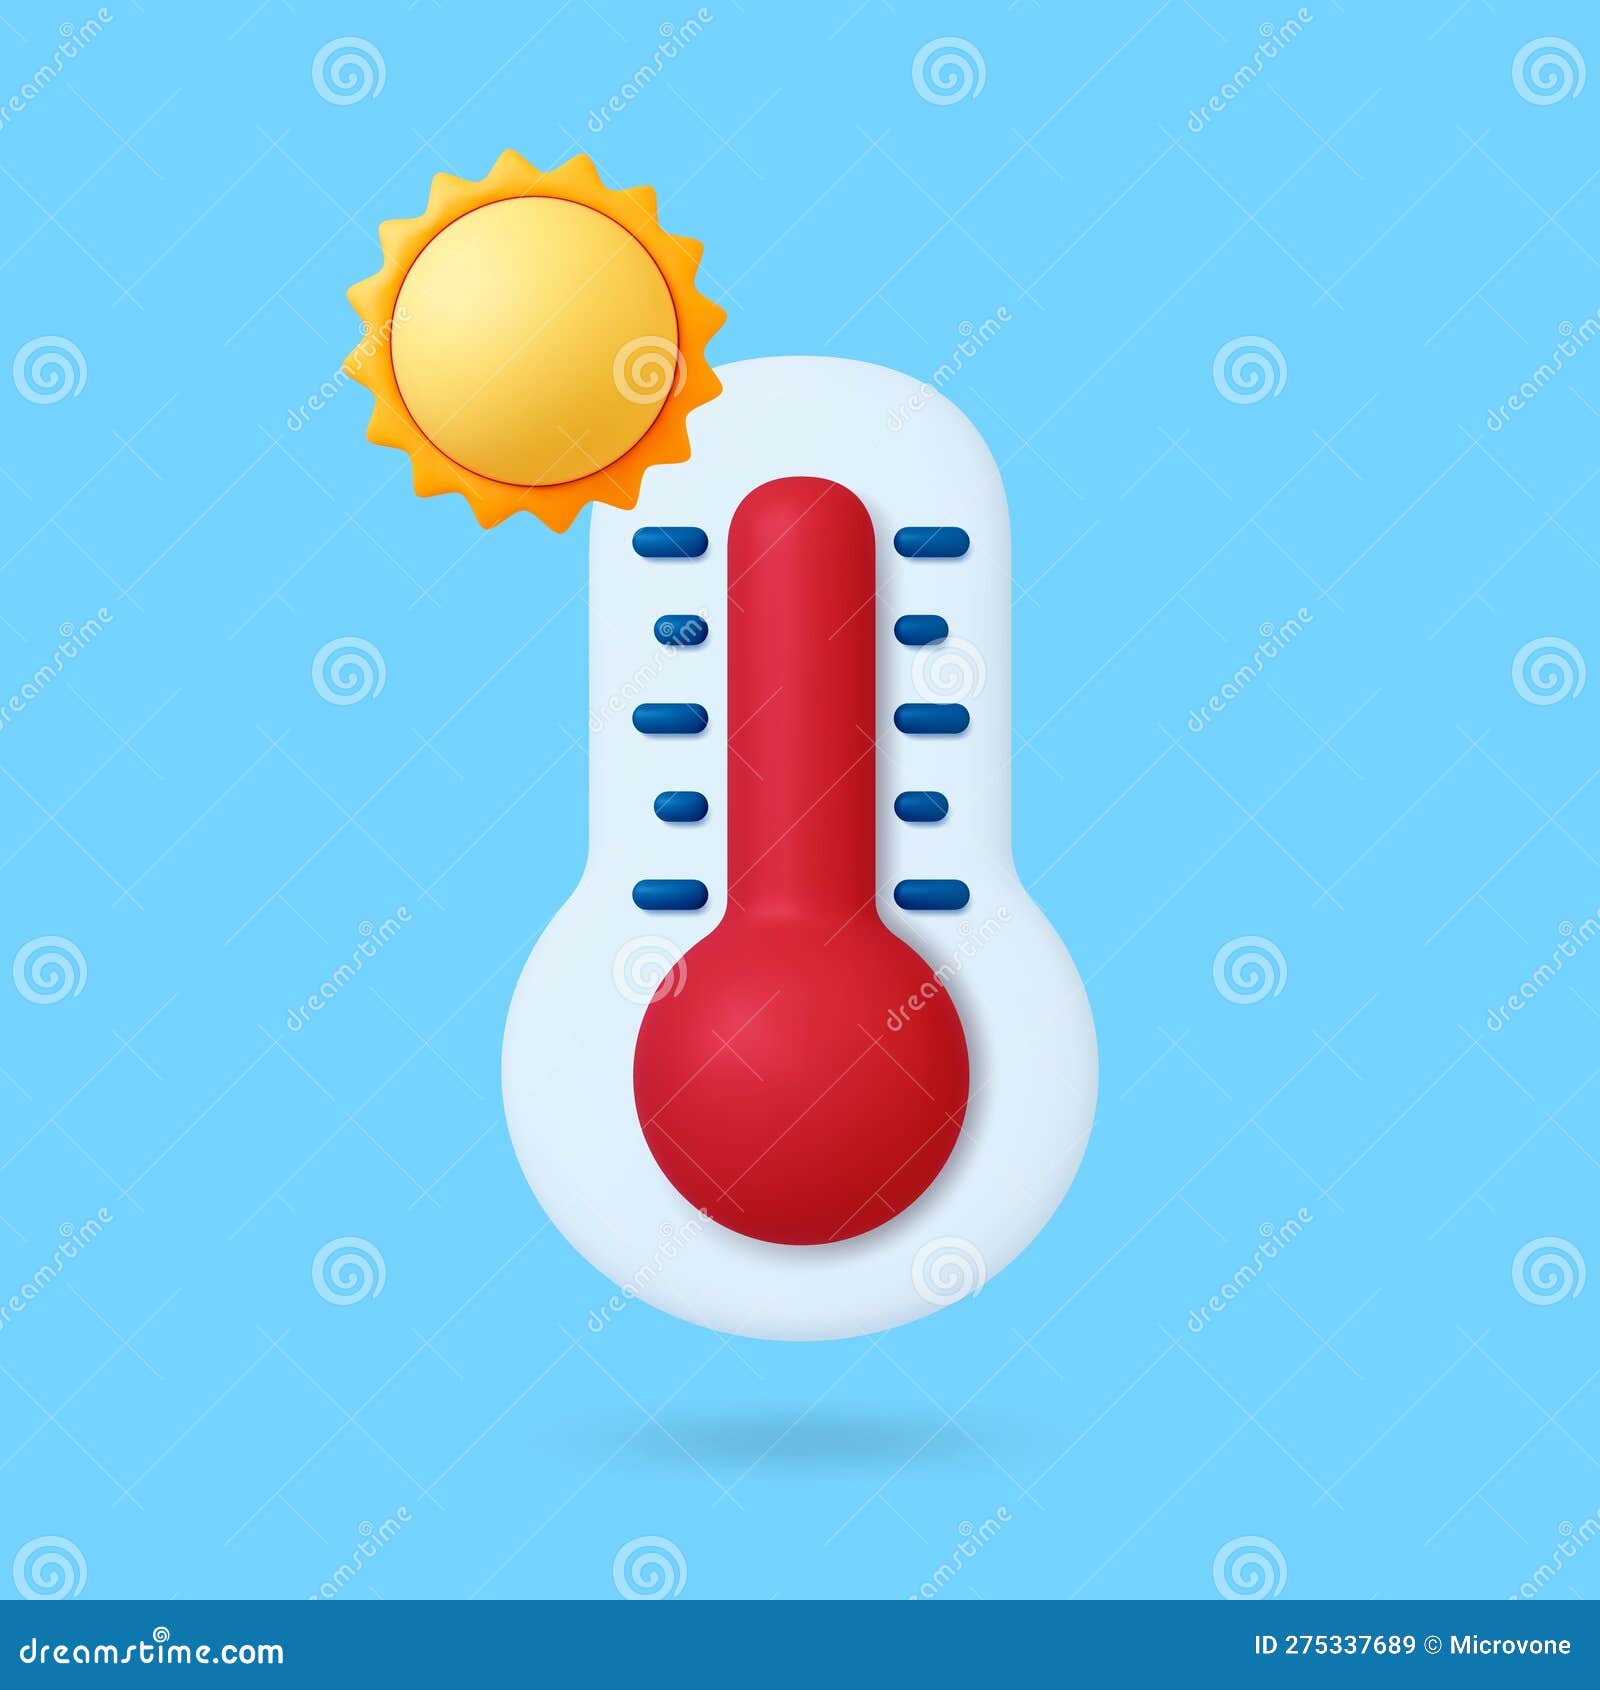 https://thumbs.dreamstime.com/z/weather-thermometer-hot-temperature-d-sun-forecast-graphic-element-realistic-render-vector-heat-icon-app-web-design-tv-275337689.jpg